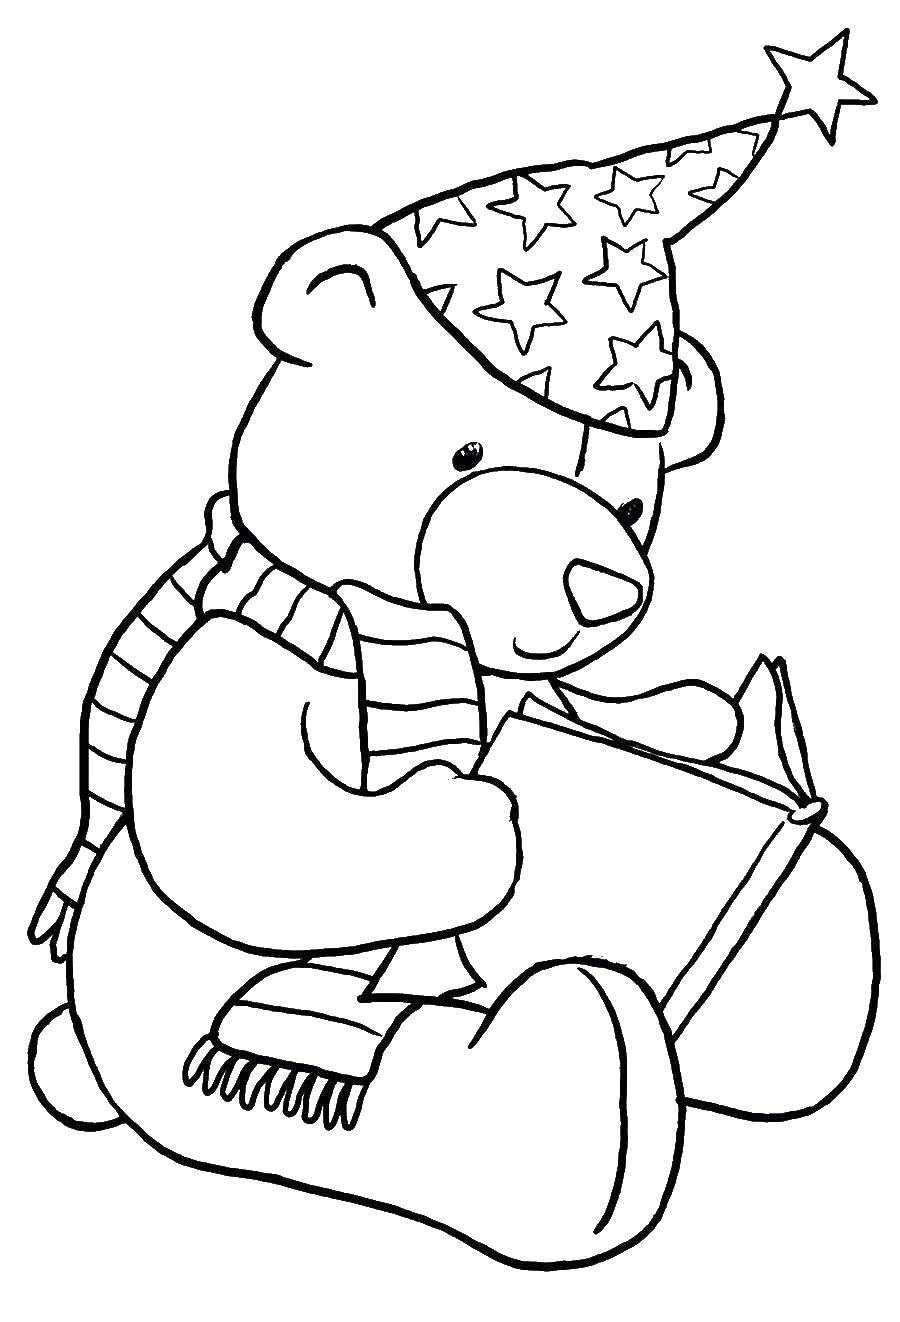 Coloring Bear with a book. Category toy. Tags:  Toy, bear.